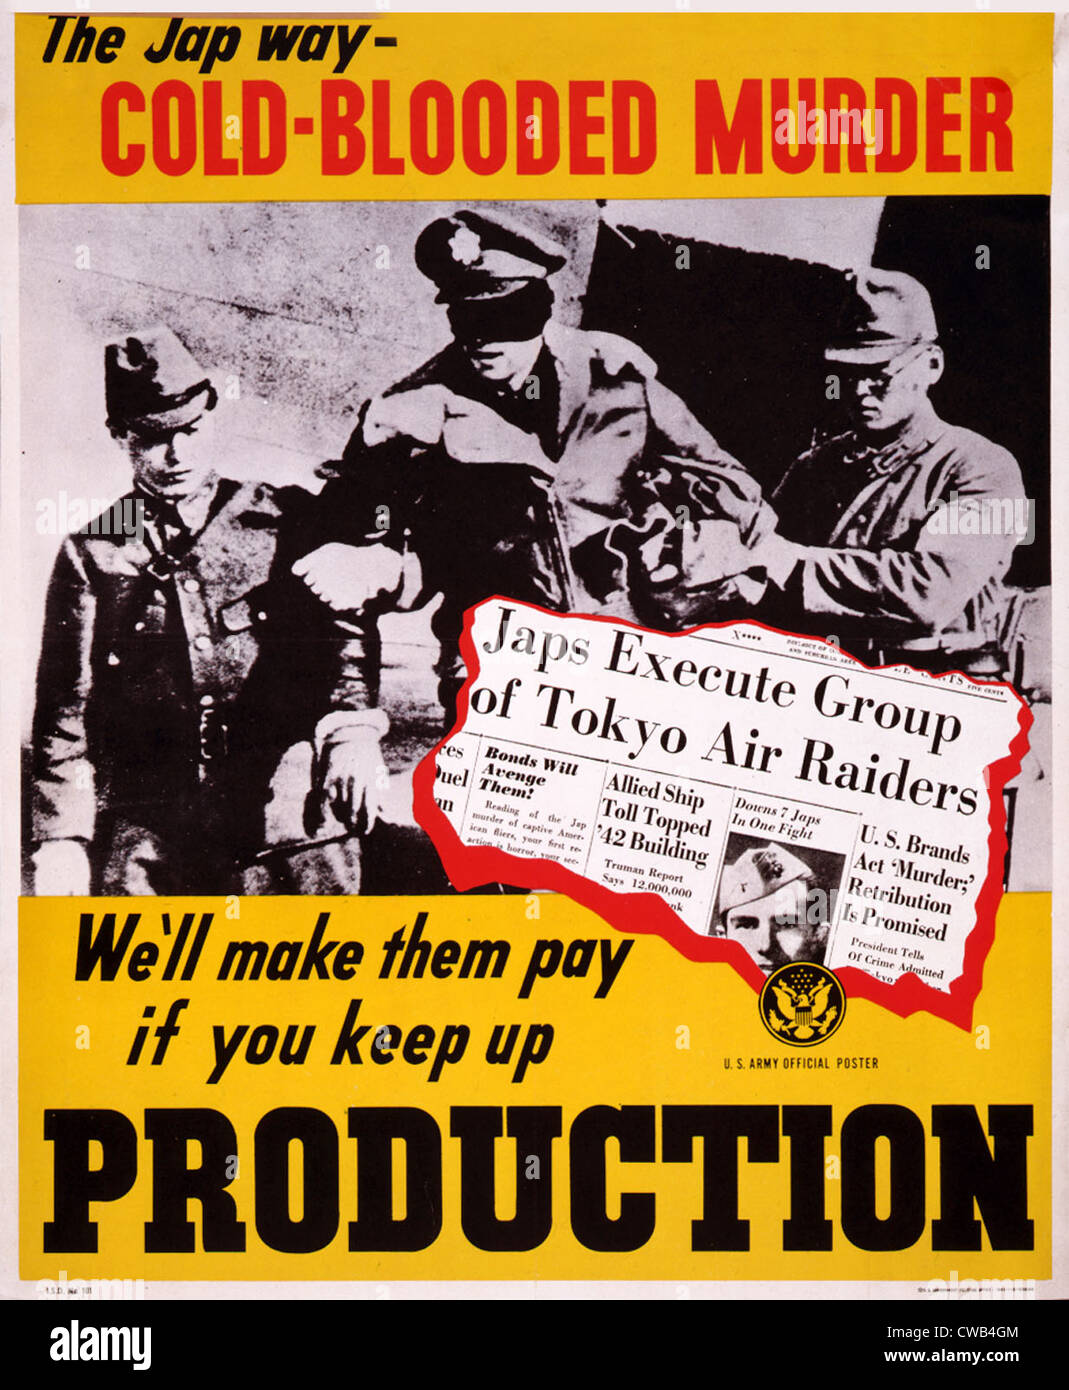 World War II, poster showing Two Japanese soldiers with a blindfolded, captured American pilot, poster reads: 'The Jap way - Stock Photo